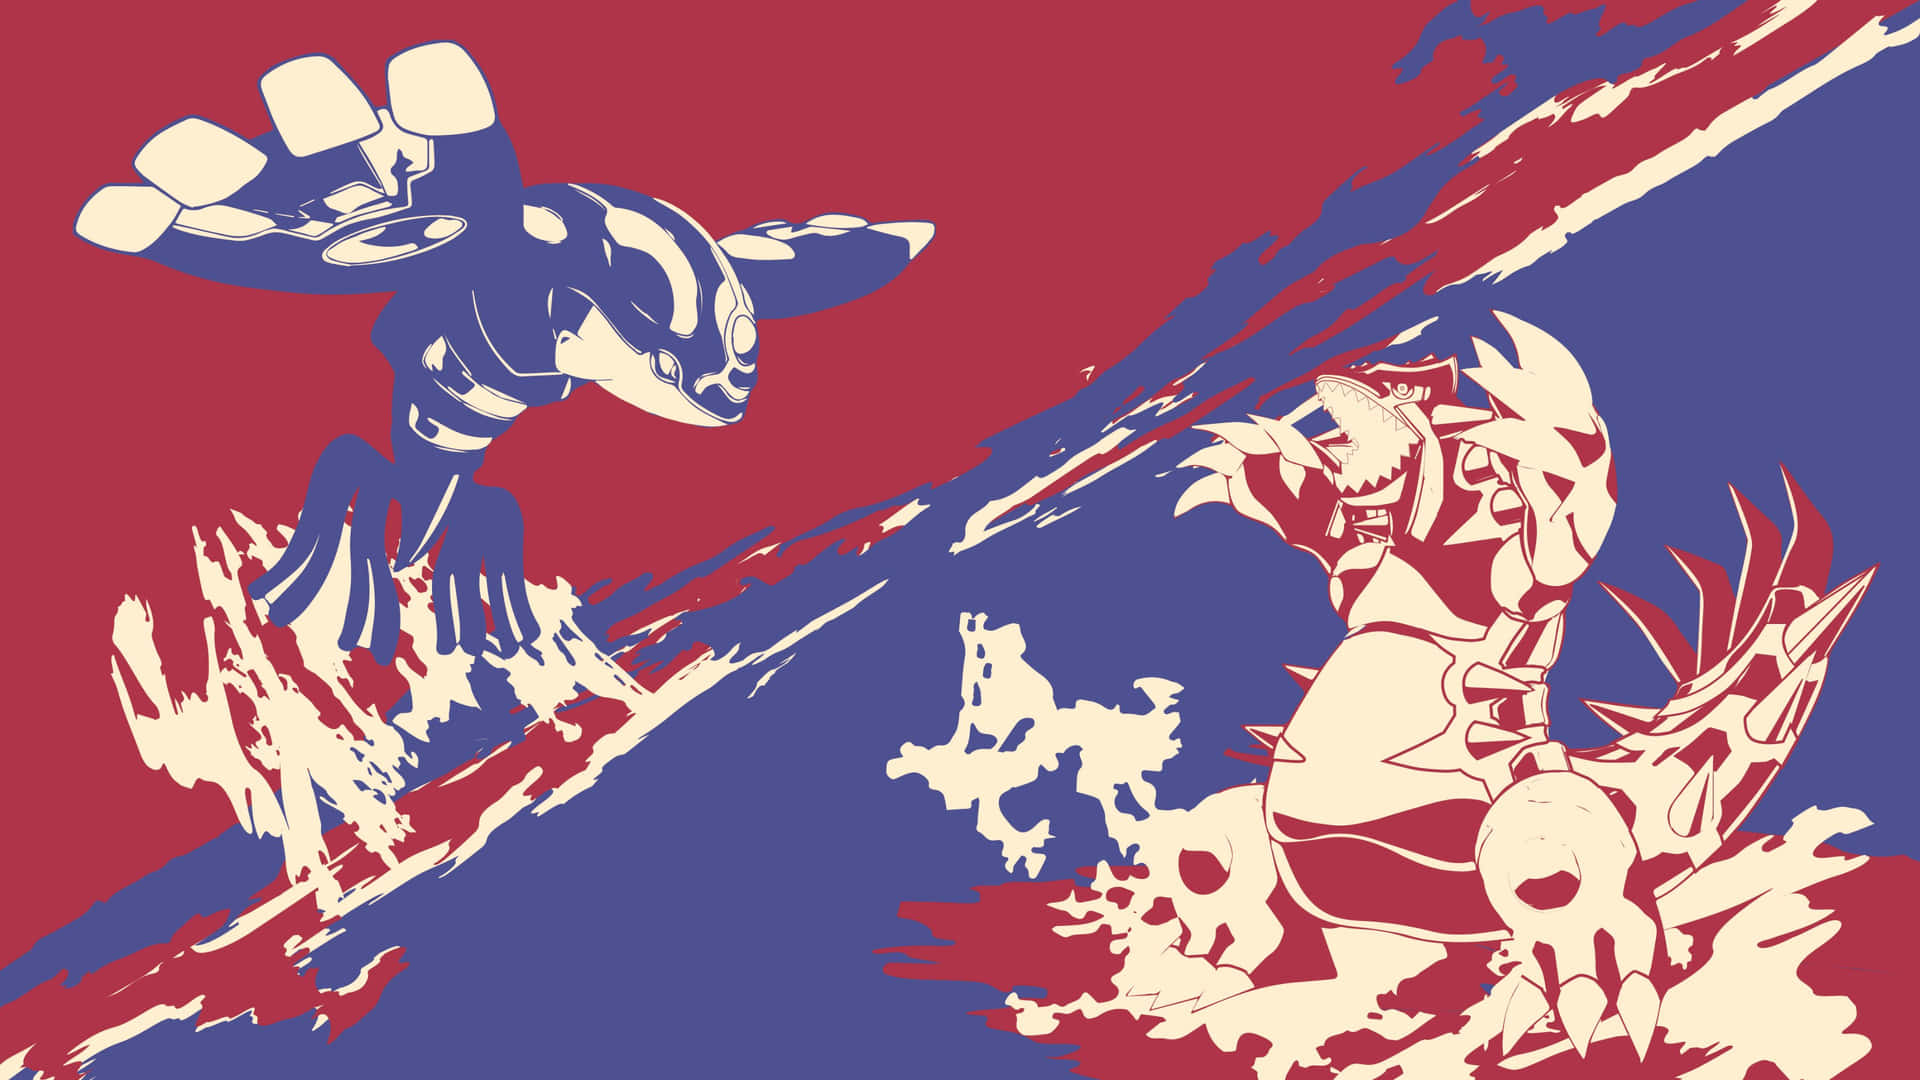 Red And Blue Versus Pokemon Battle Background